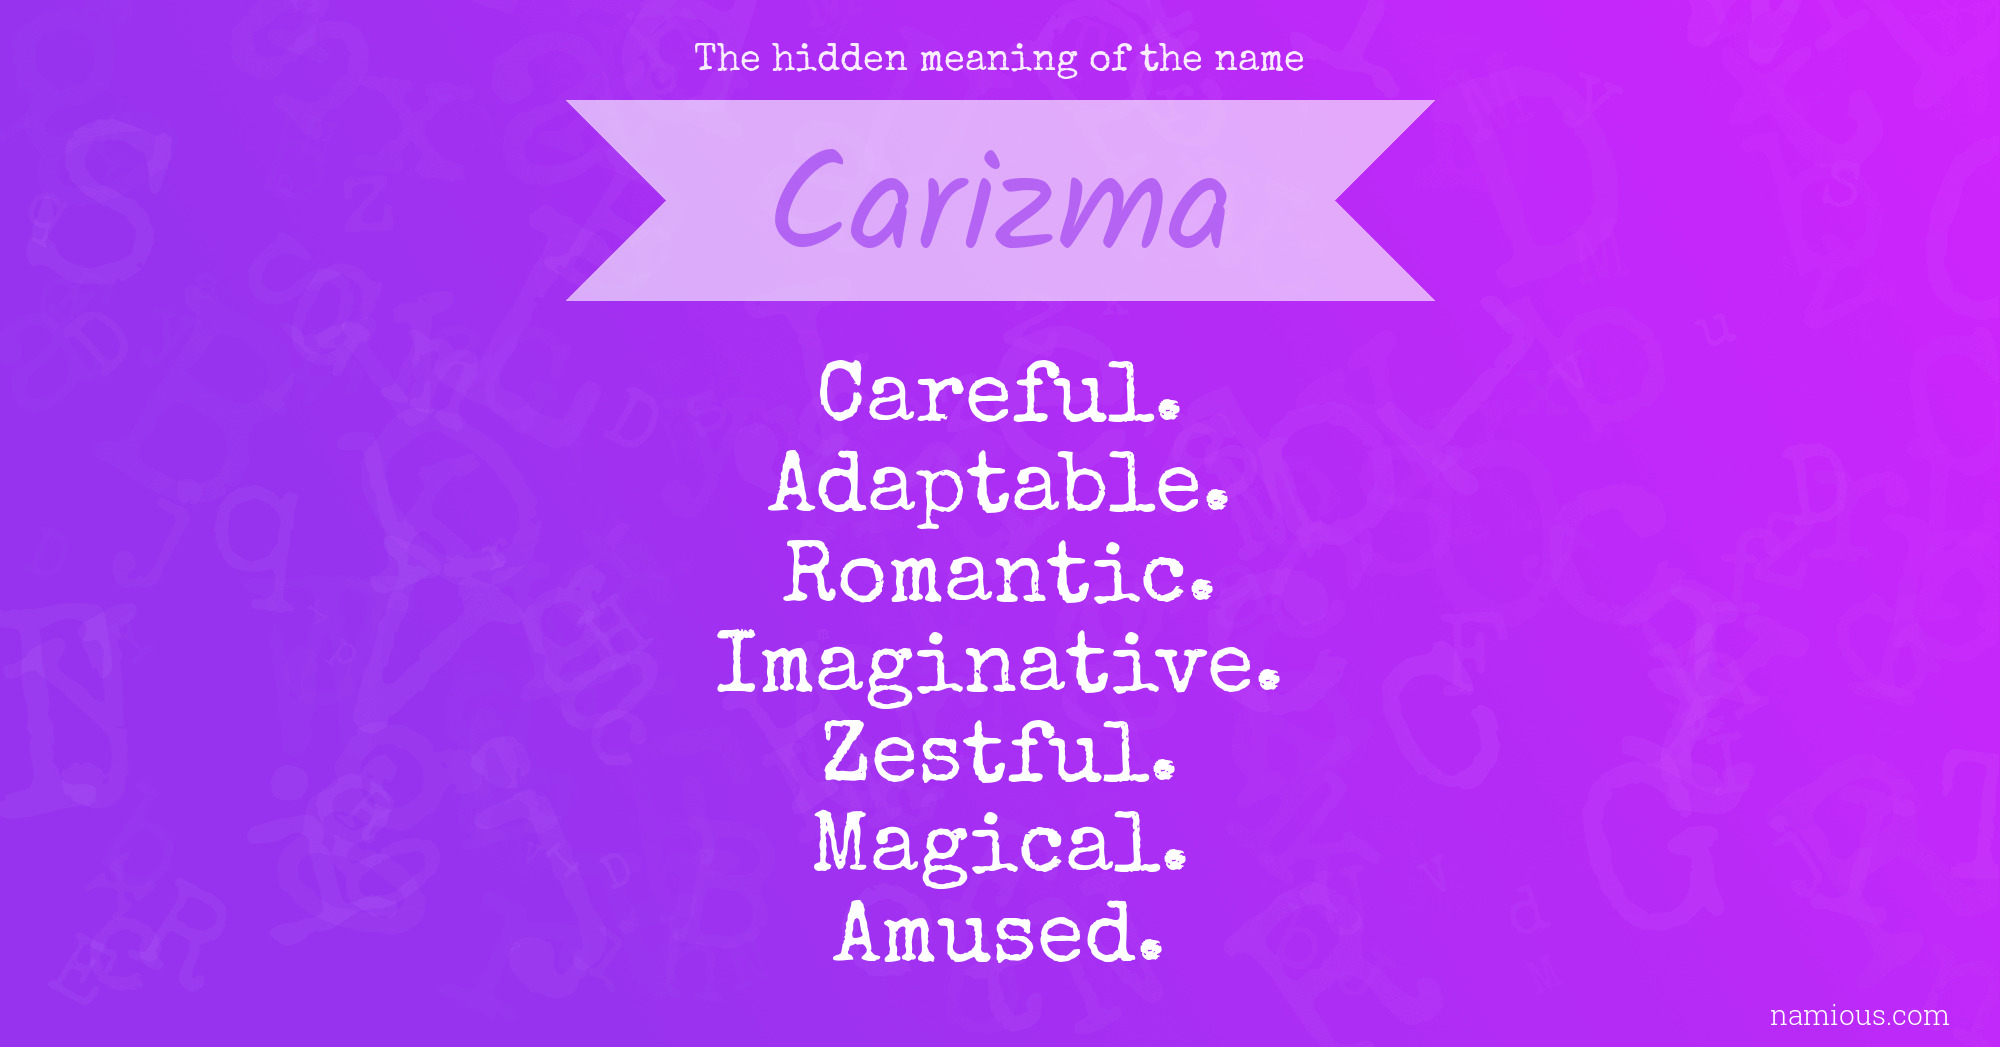 The hidden meaning of the name Carizma